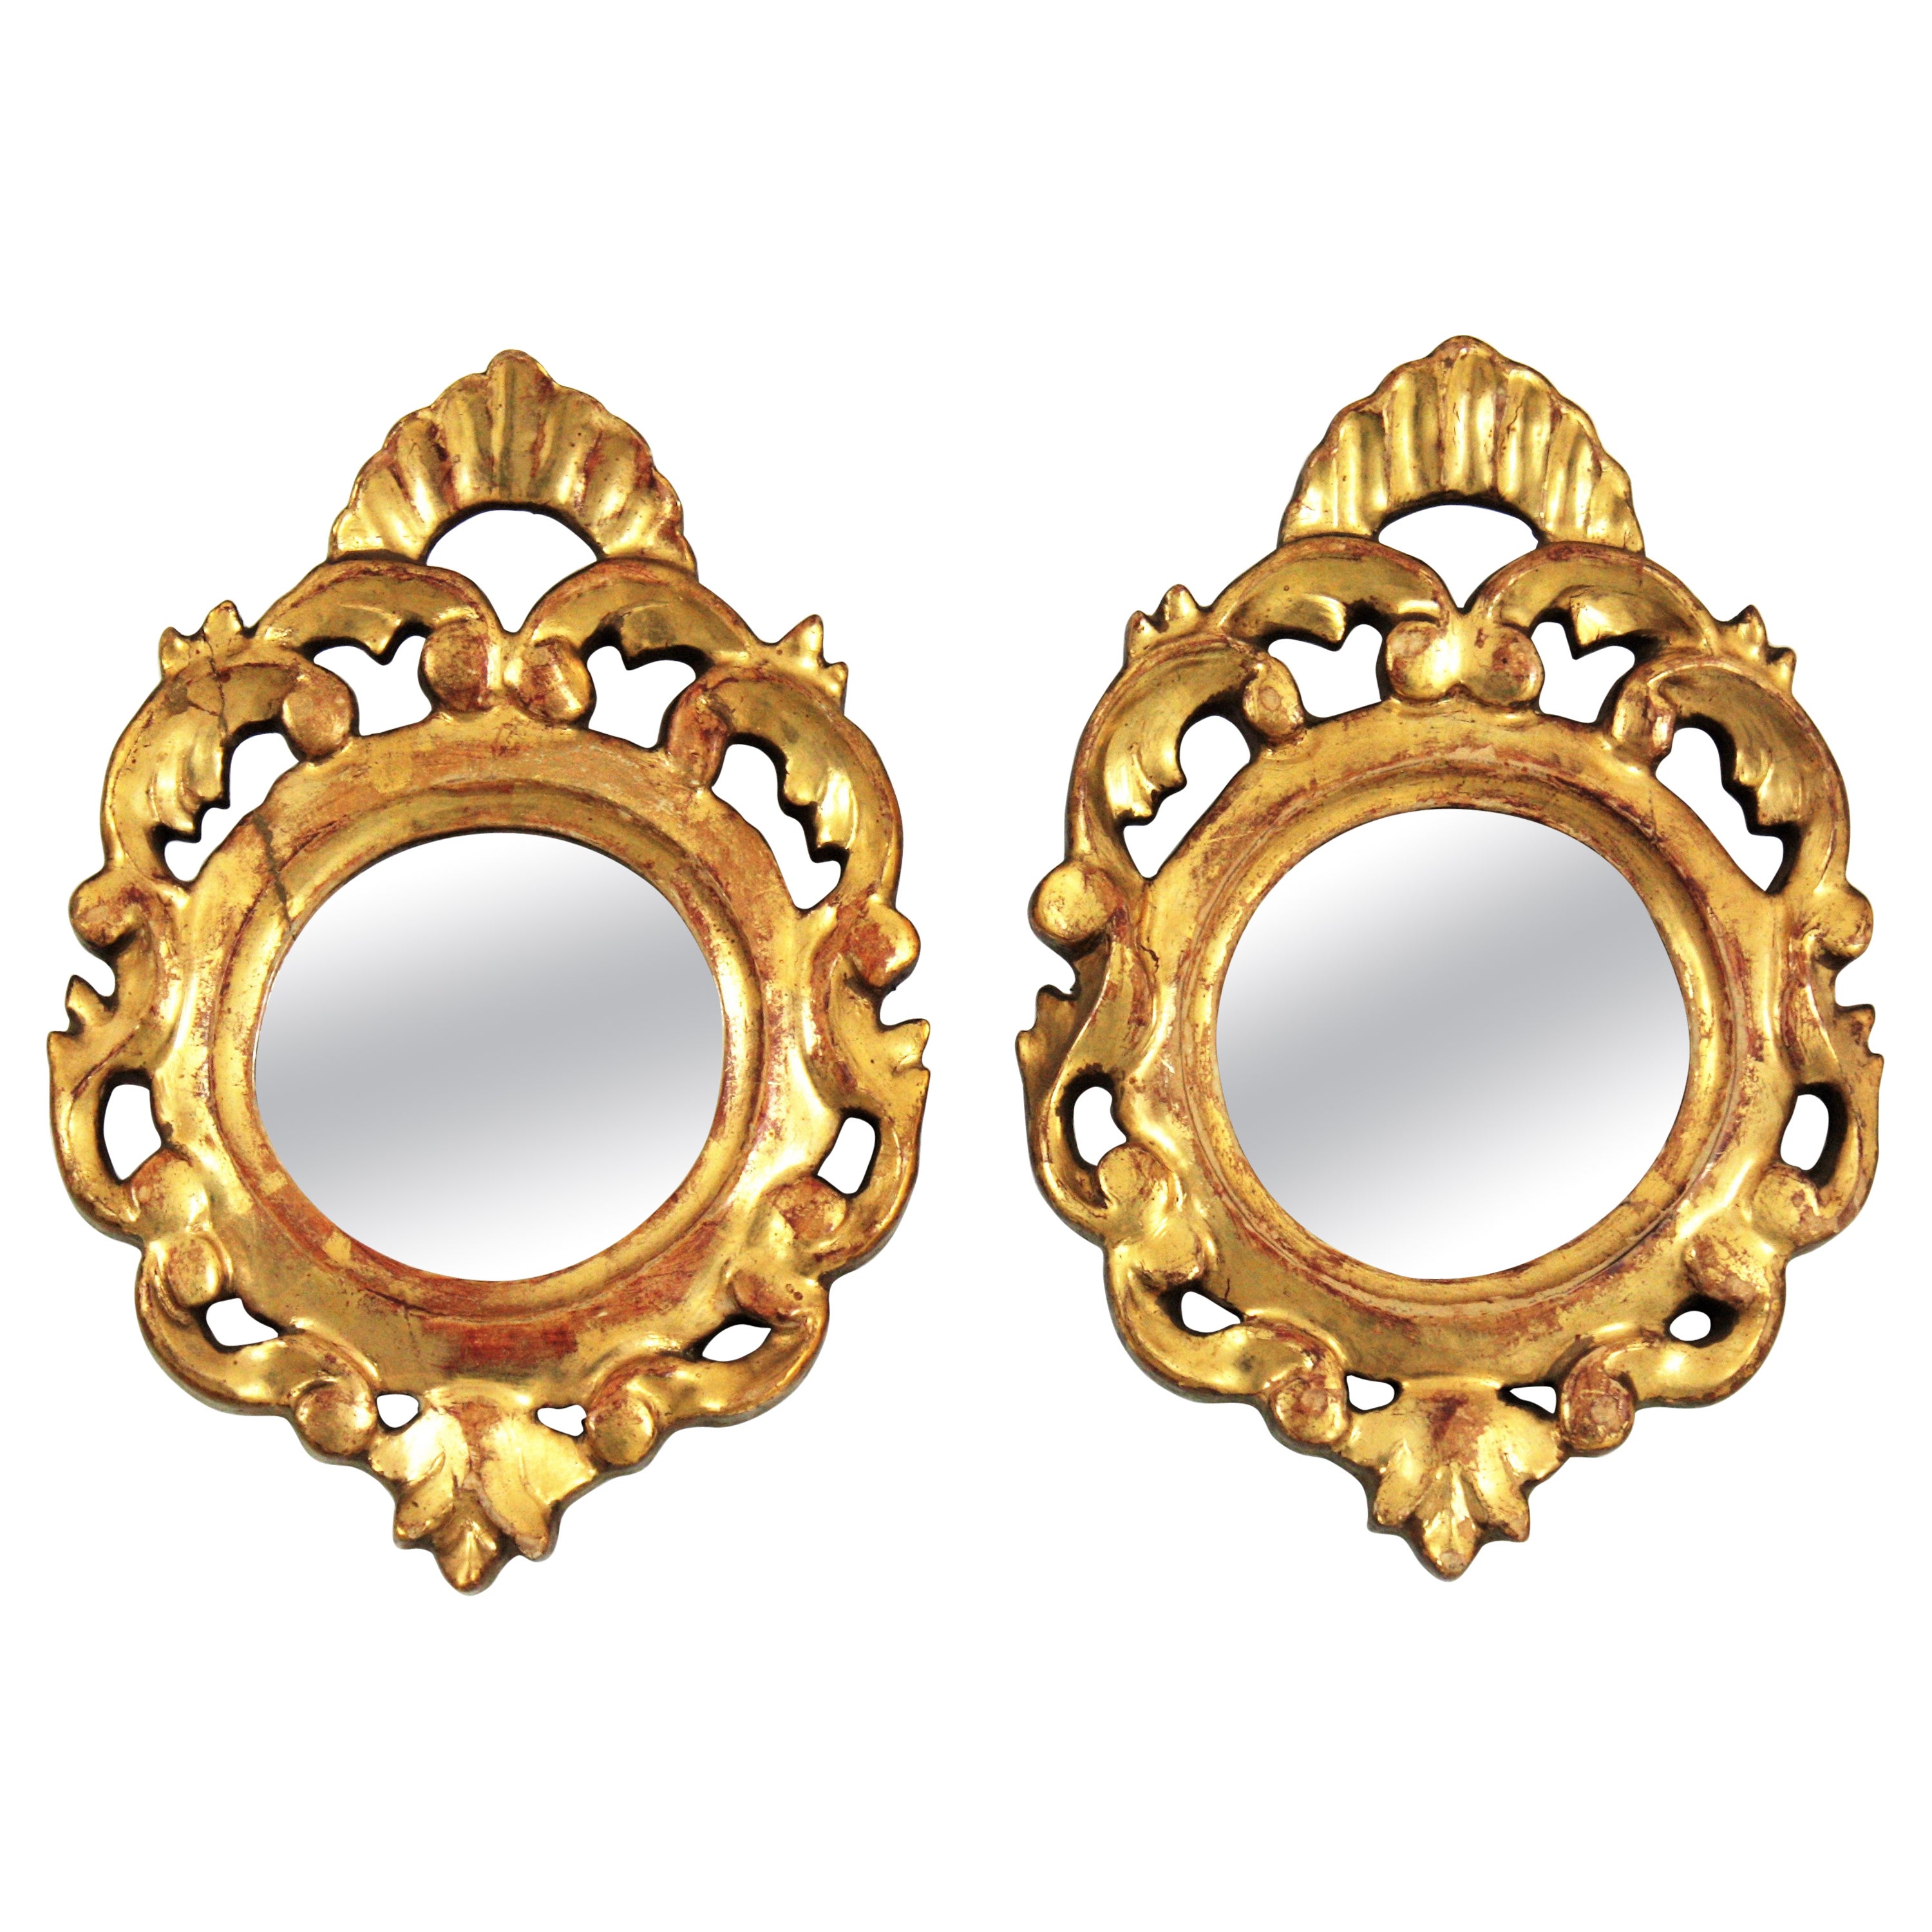 Rococo Style Carved Giltwood Miniature Wall Mirrors, Pair For Sale